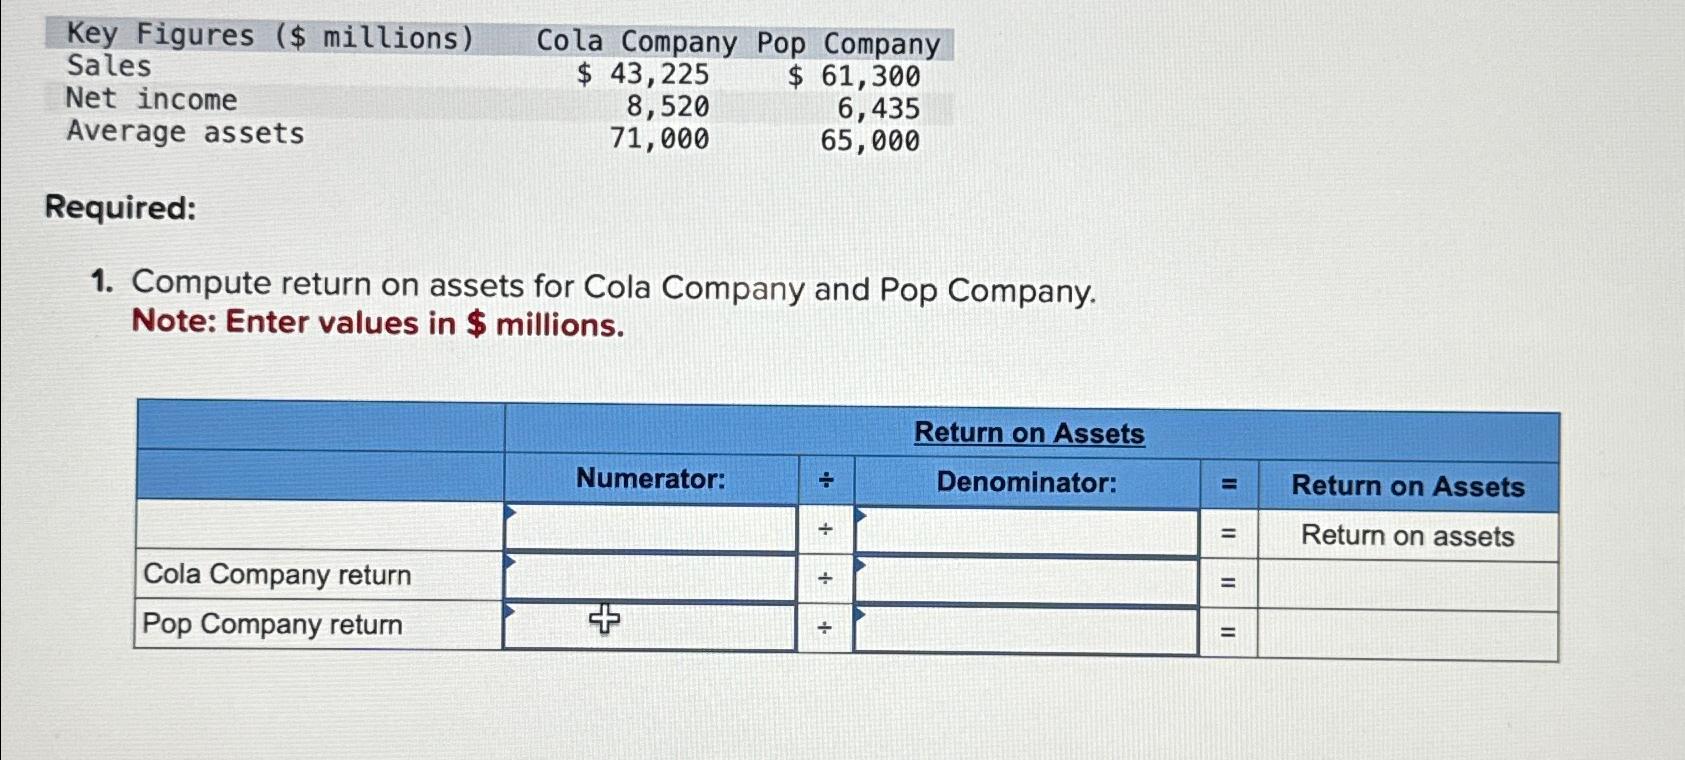 Key Figures ($ millions) Sales Net income Average assets Required: 1. Compute return on assets for Cola